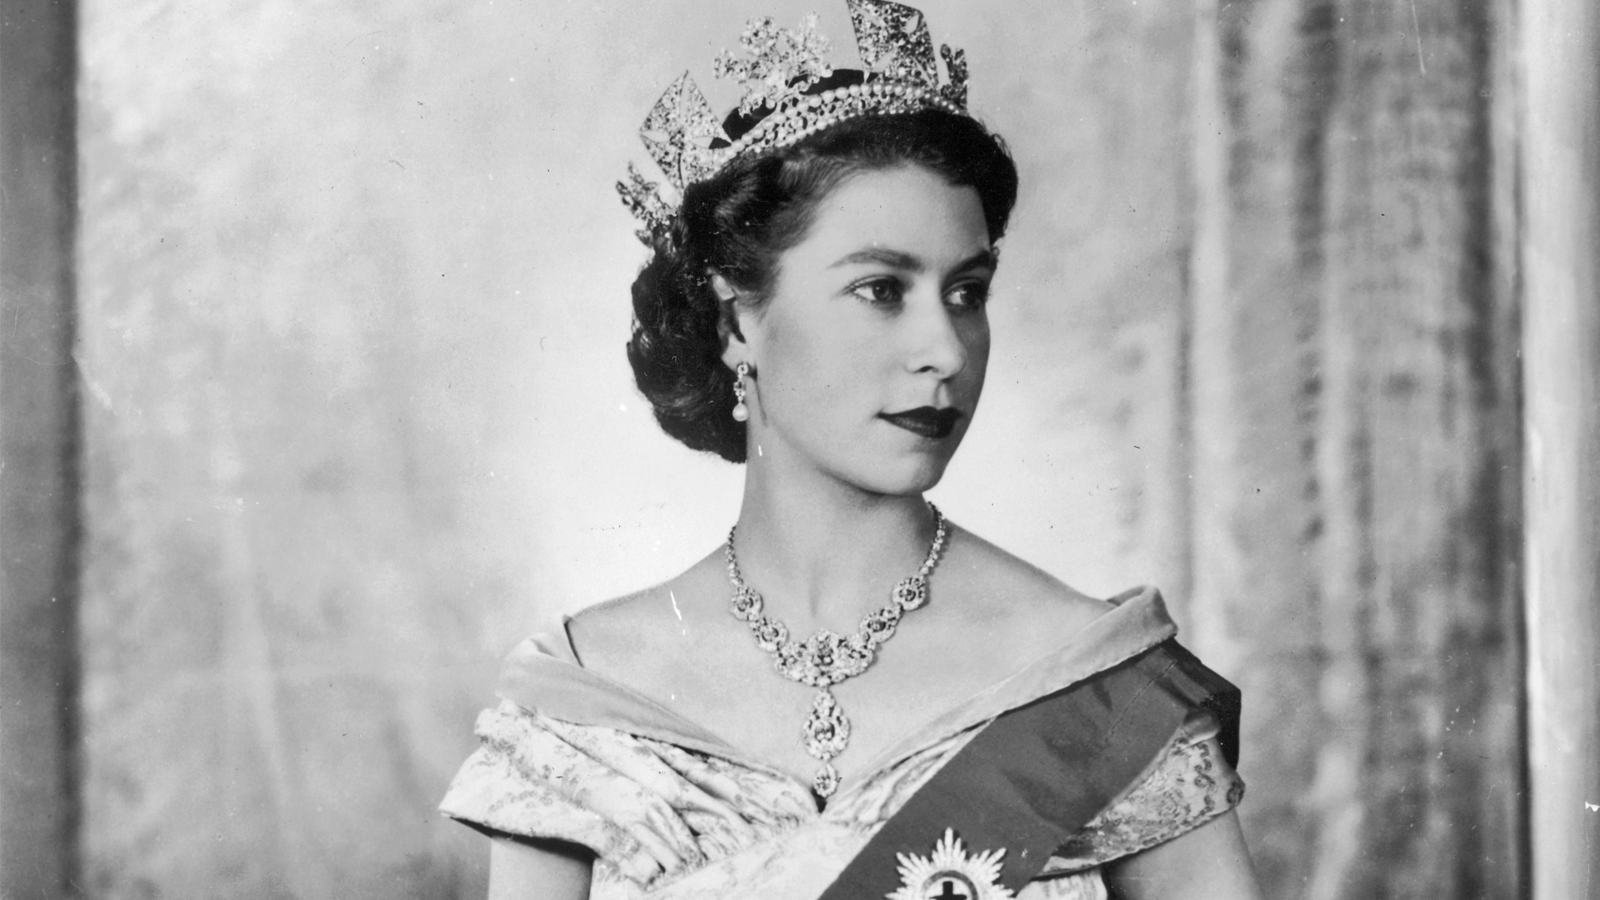 Her Majesty Queen Elizabeth II: an incredible life in picture